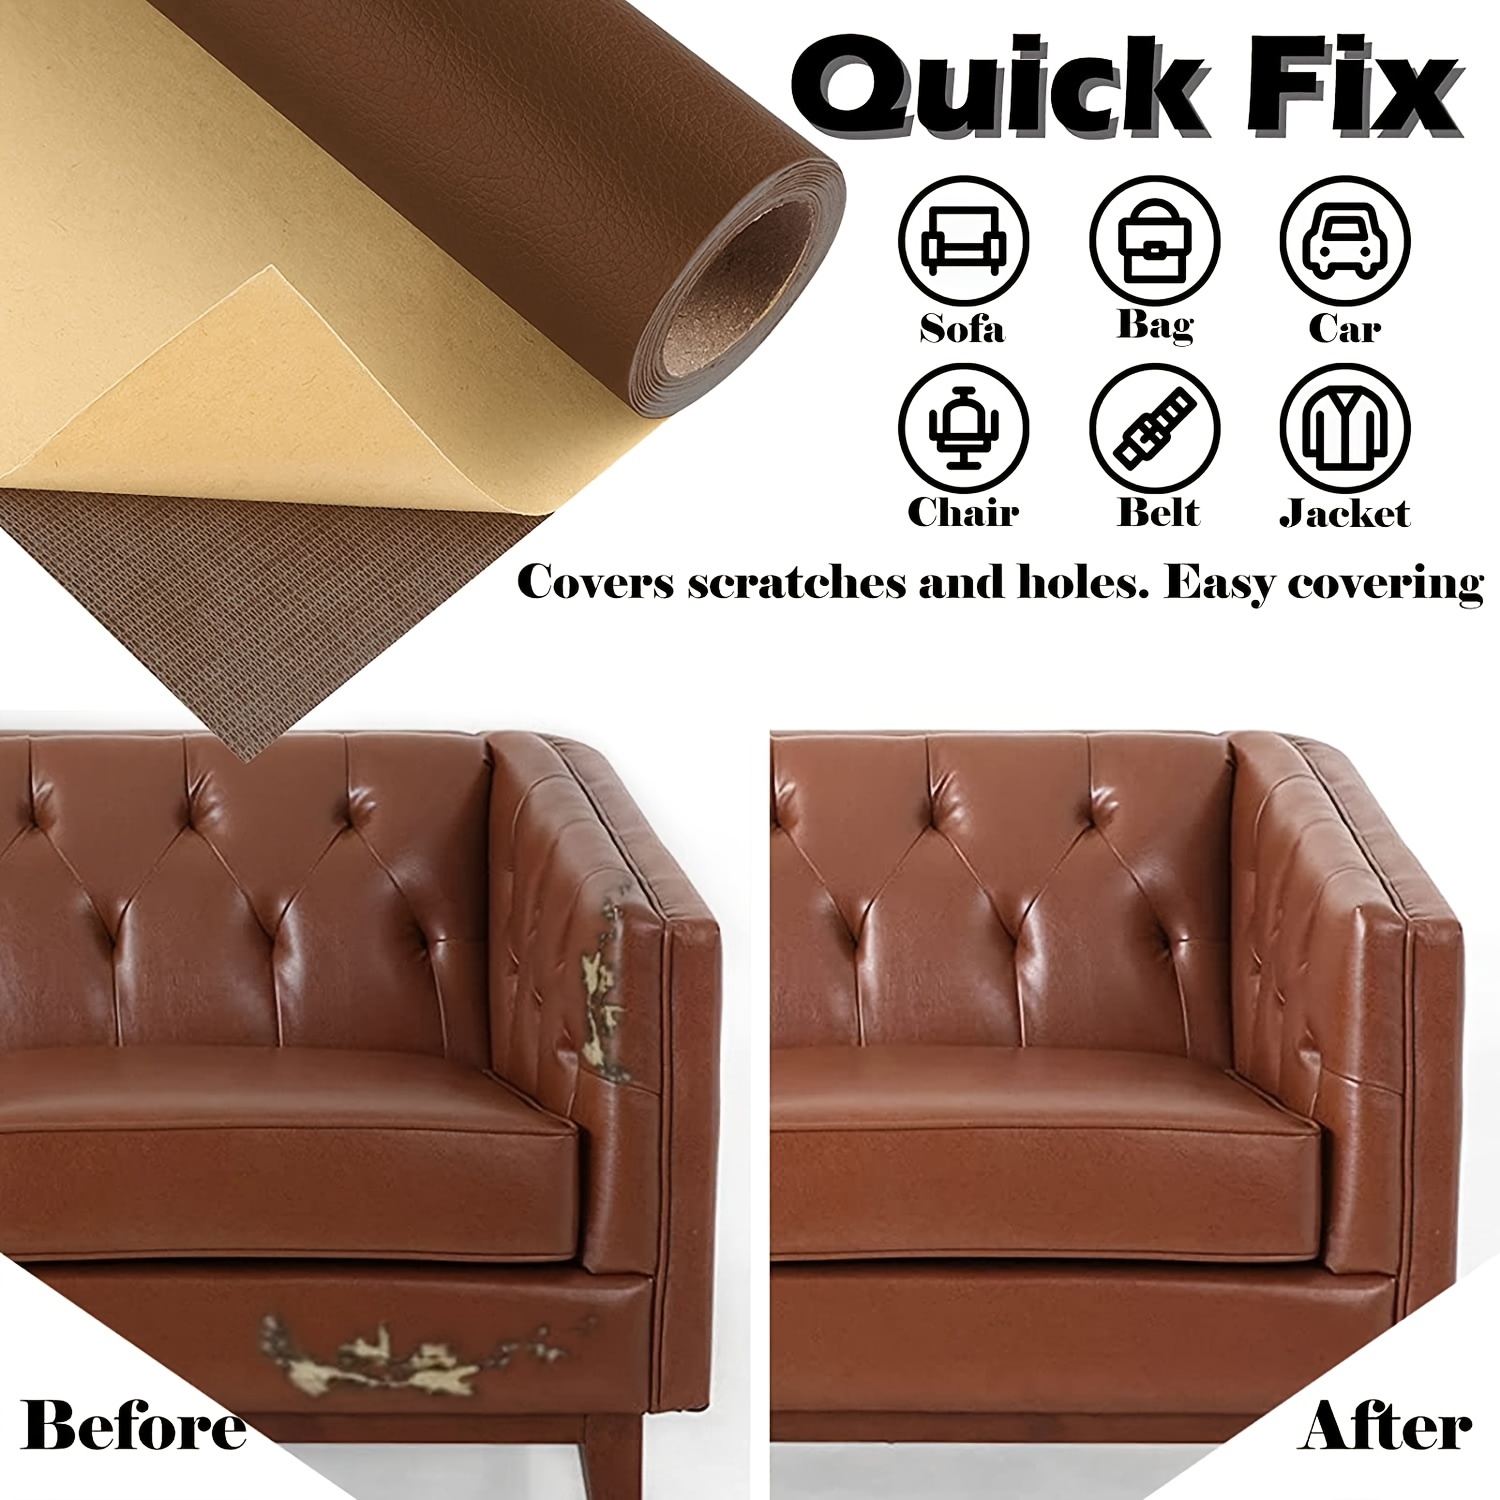 Leather And Vinyl Repair Kit For Couches Sofa Furniture Car Seats Patch #